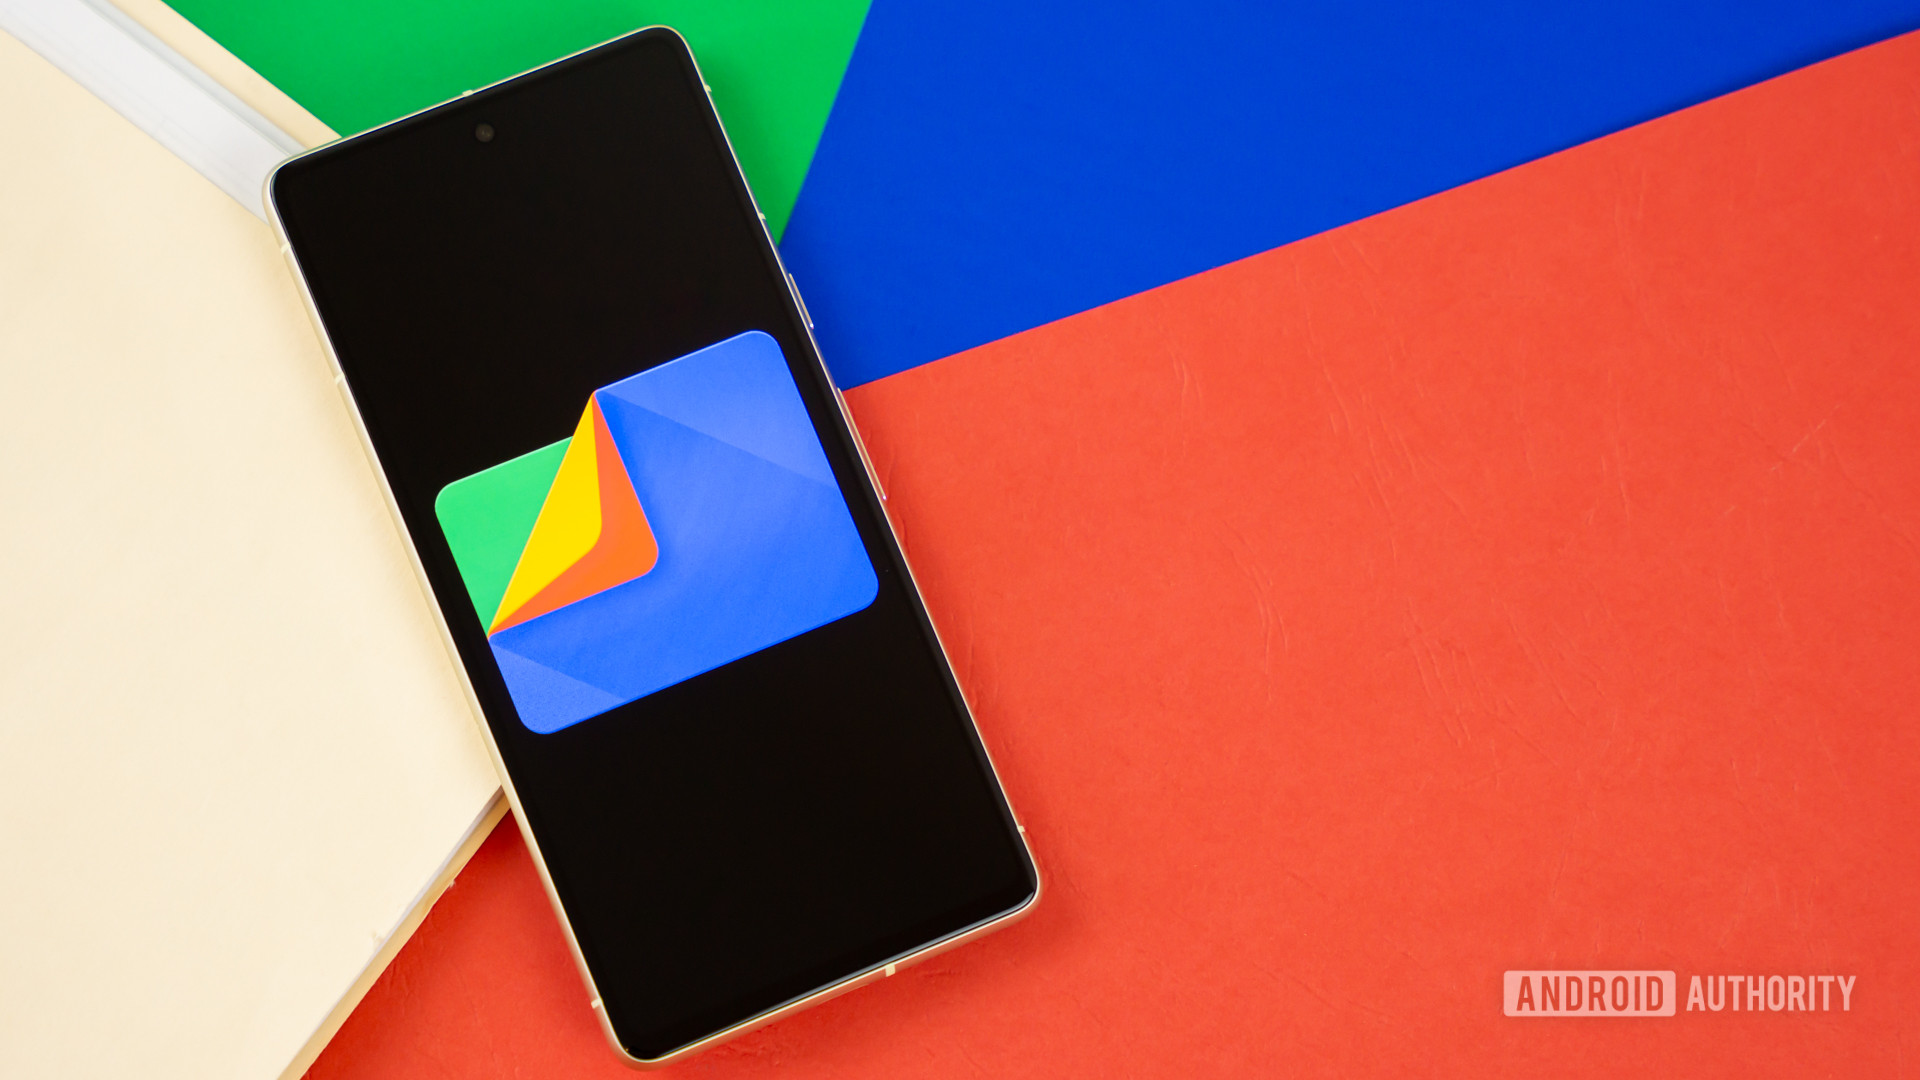 Google Files app logo on smartphone with manila folder and colorful background Stock photo 3